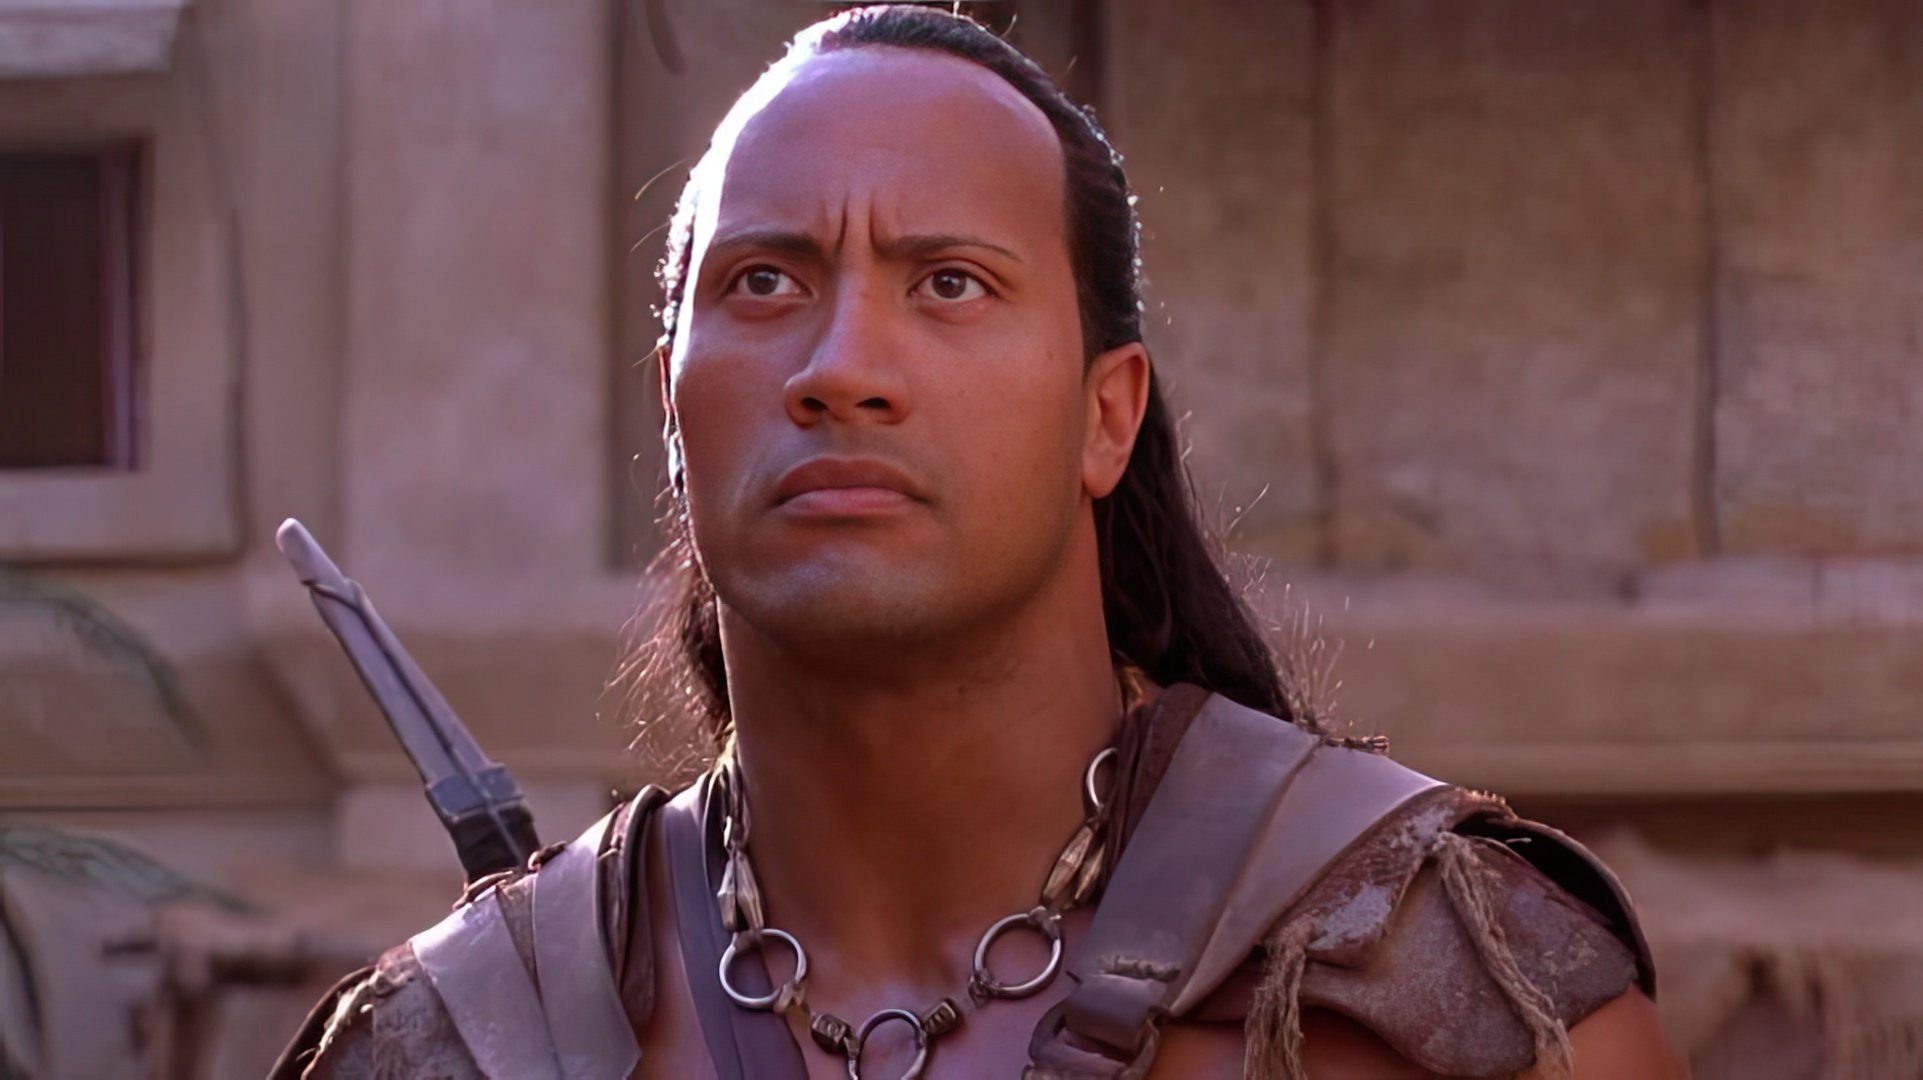 A scene from ’The Scorpion King’